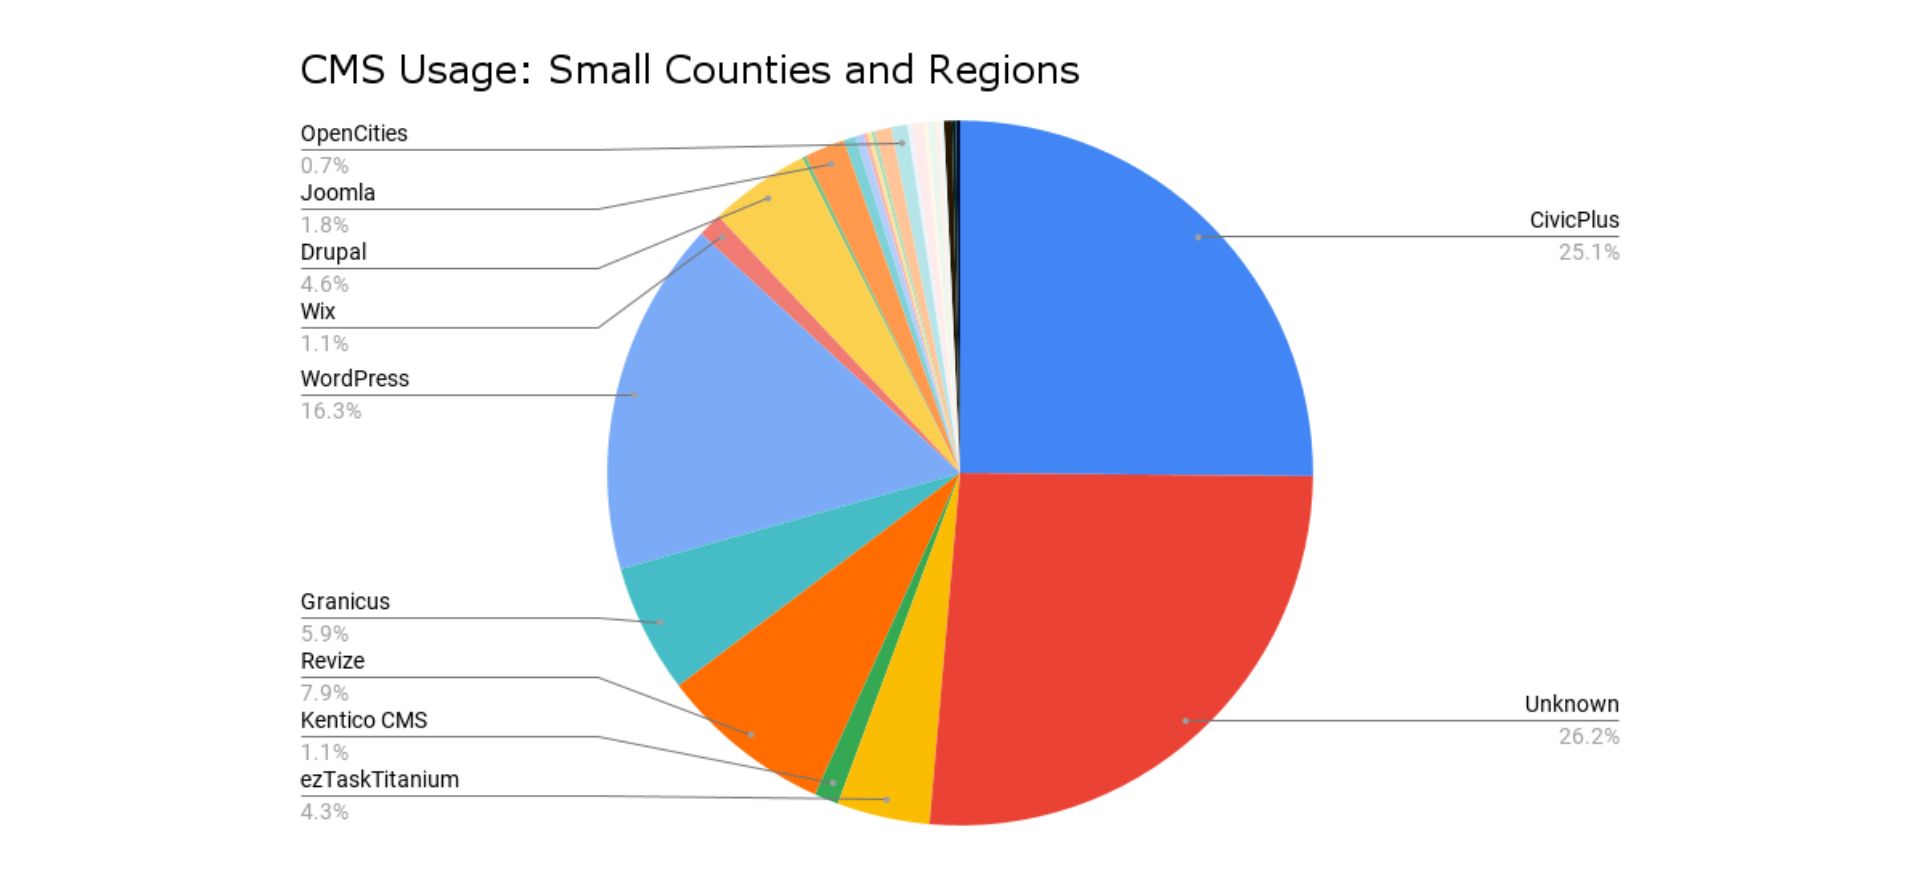 cms usage: small counties